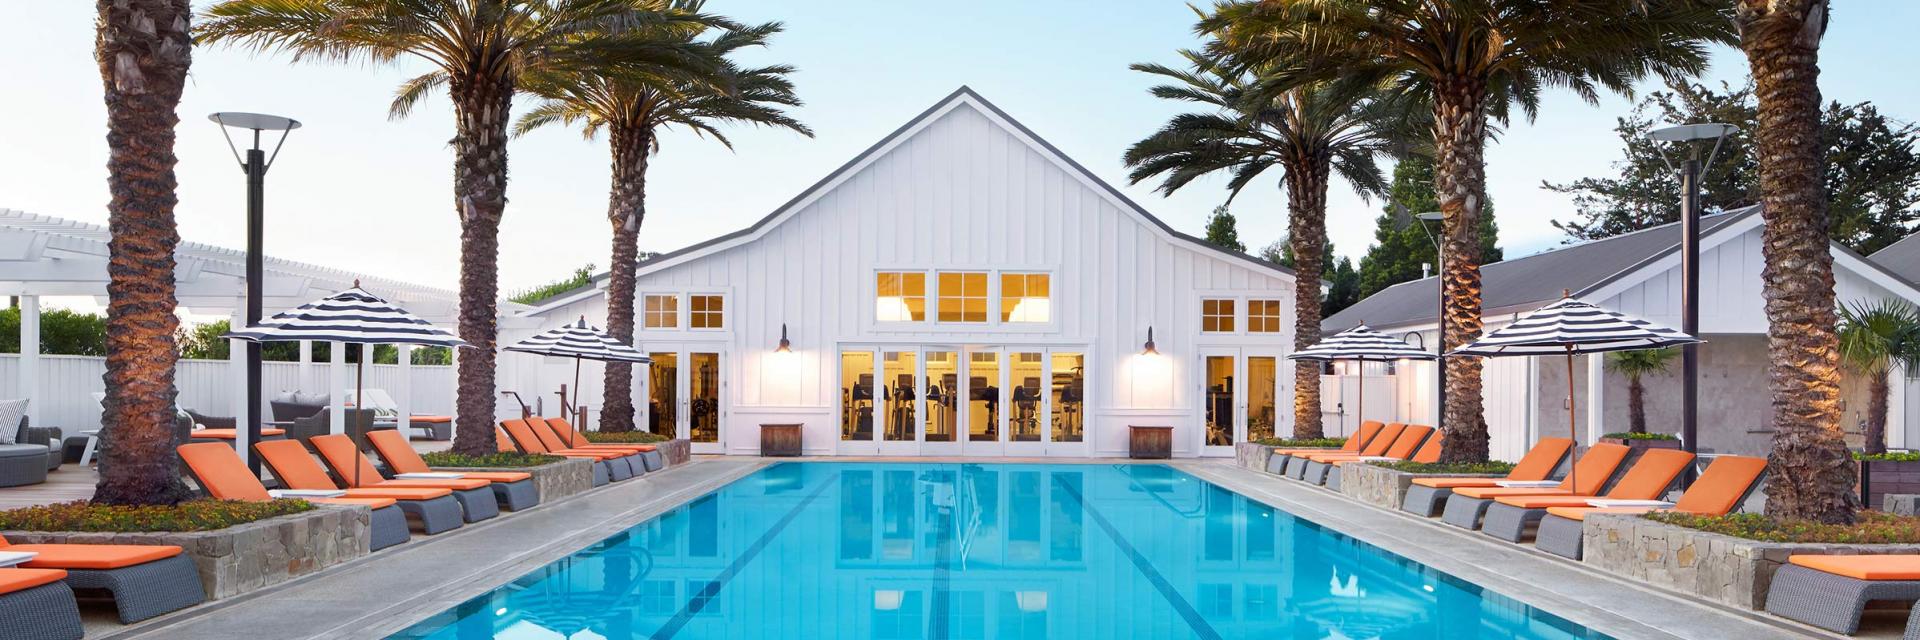 Ottos Pool at Carneros Resort and Spa